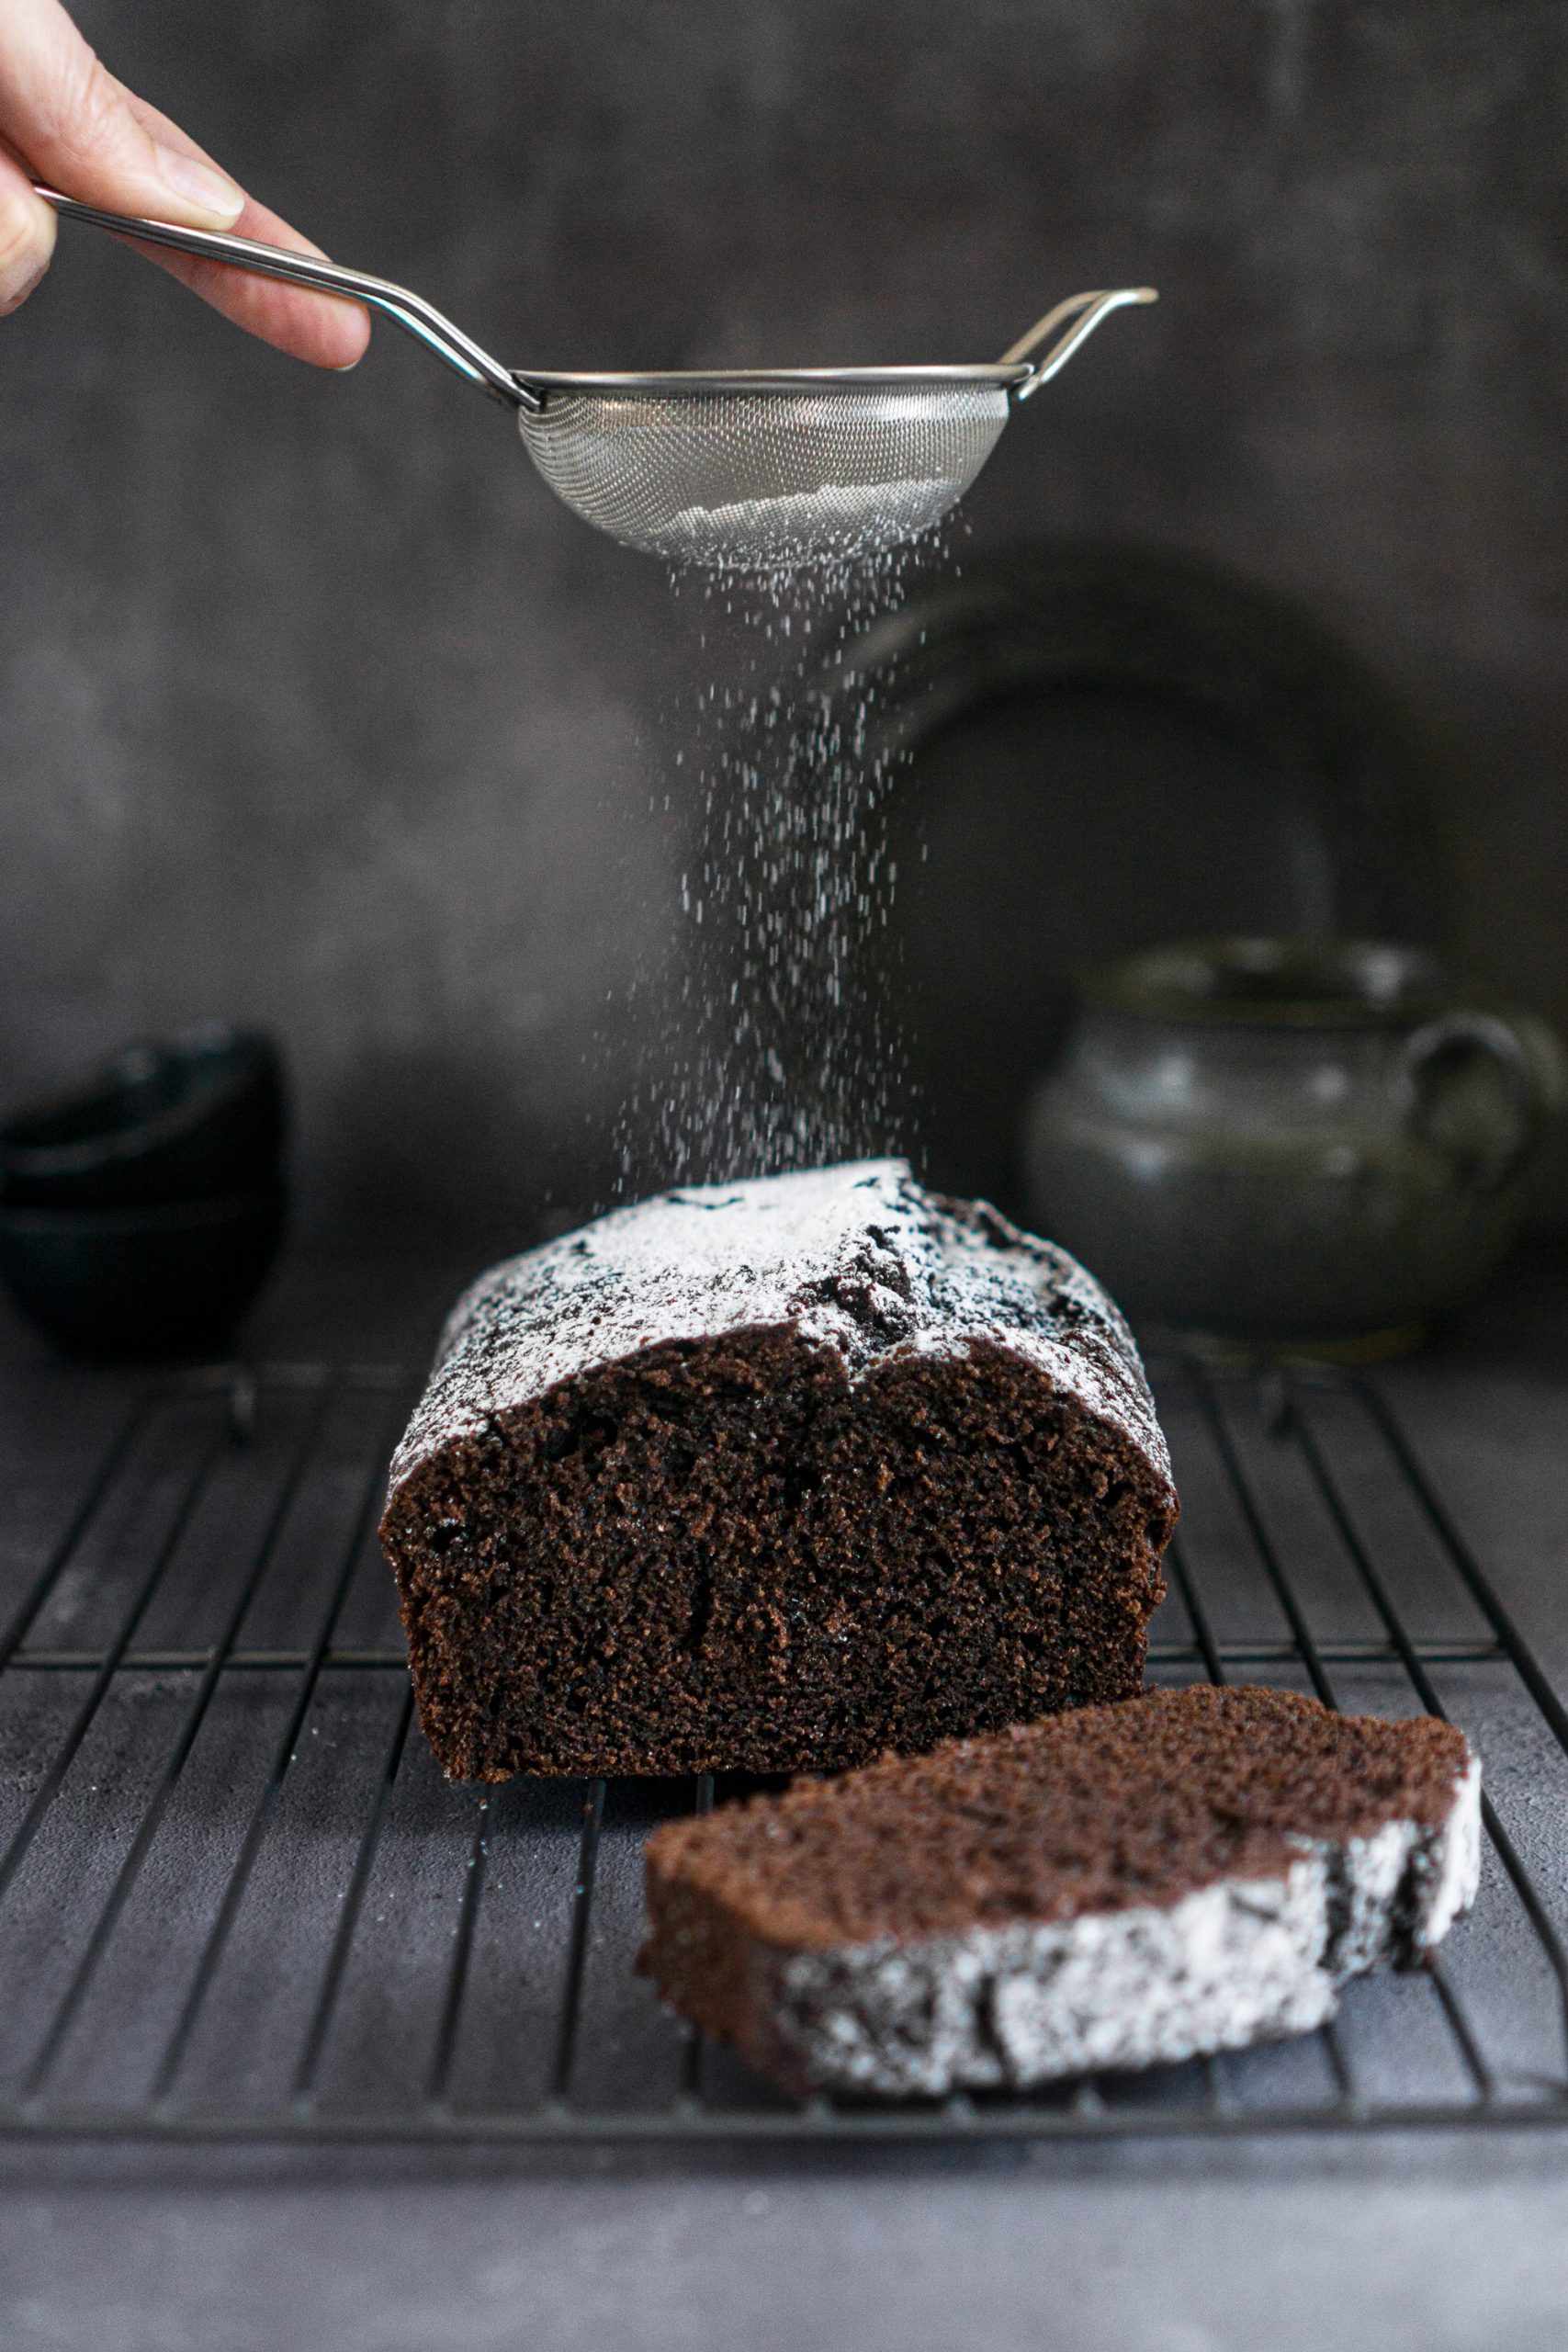 Moist chocolate loaf cake being dusted with powdered sugar